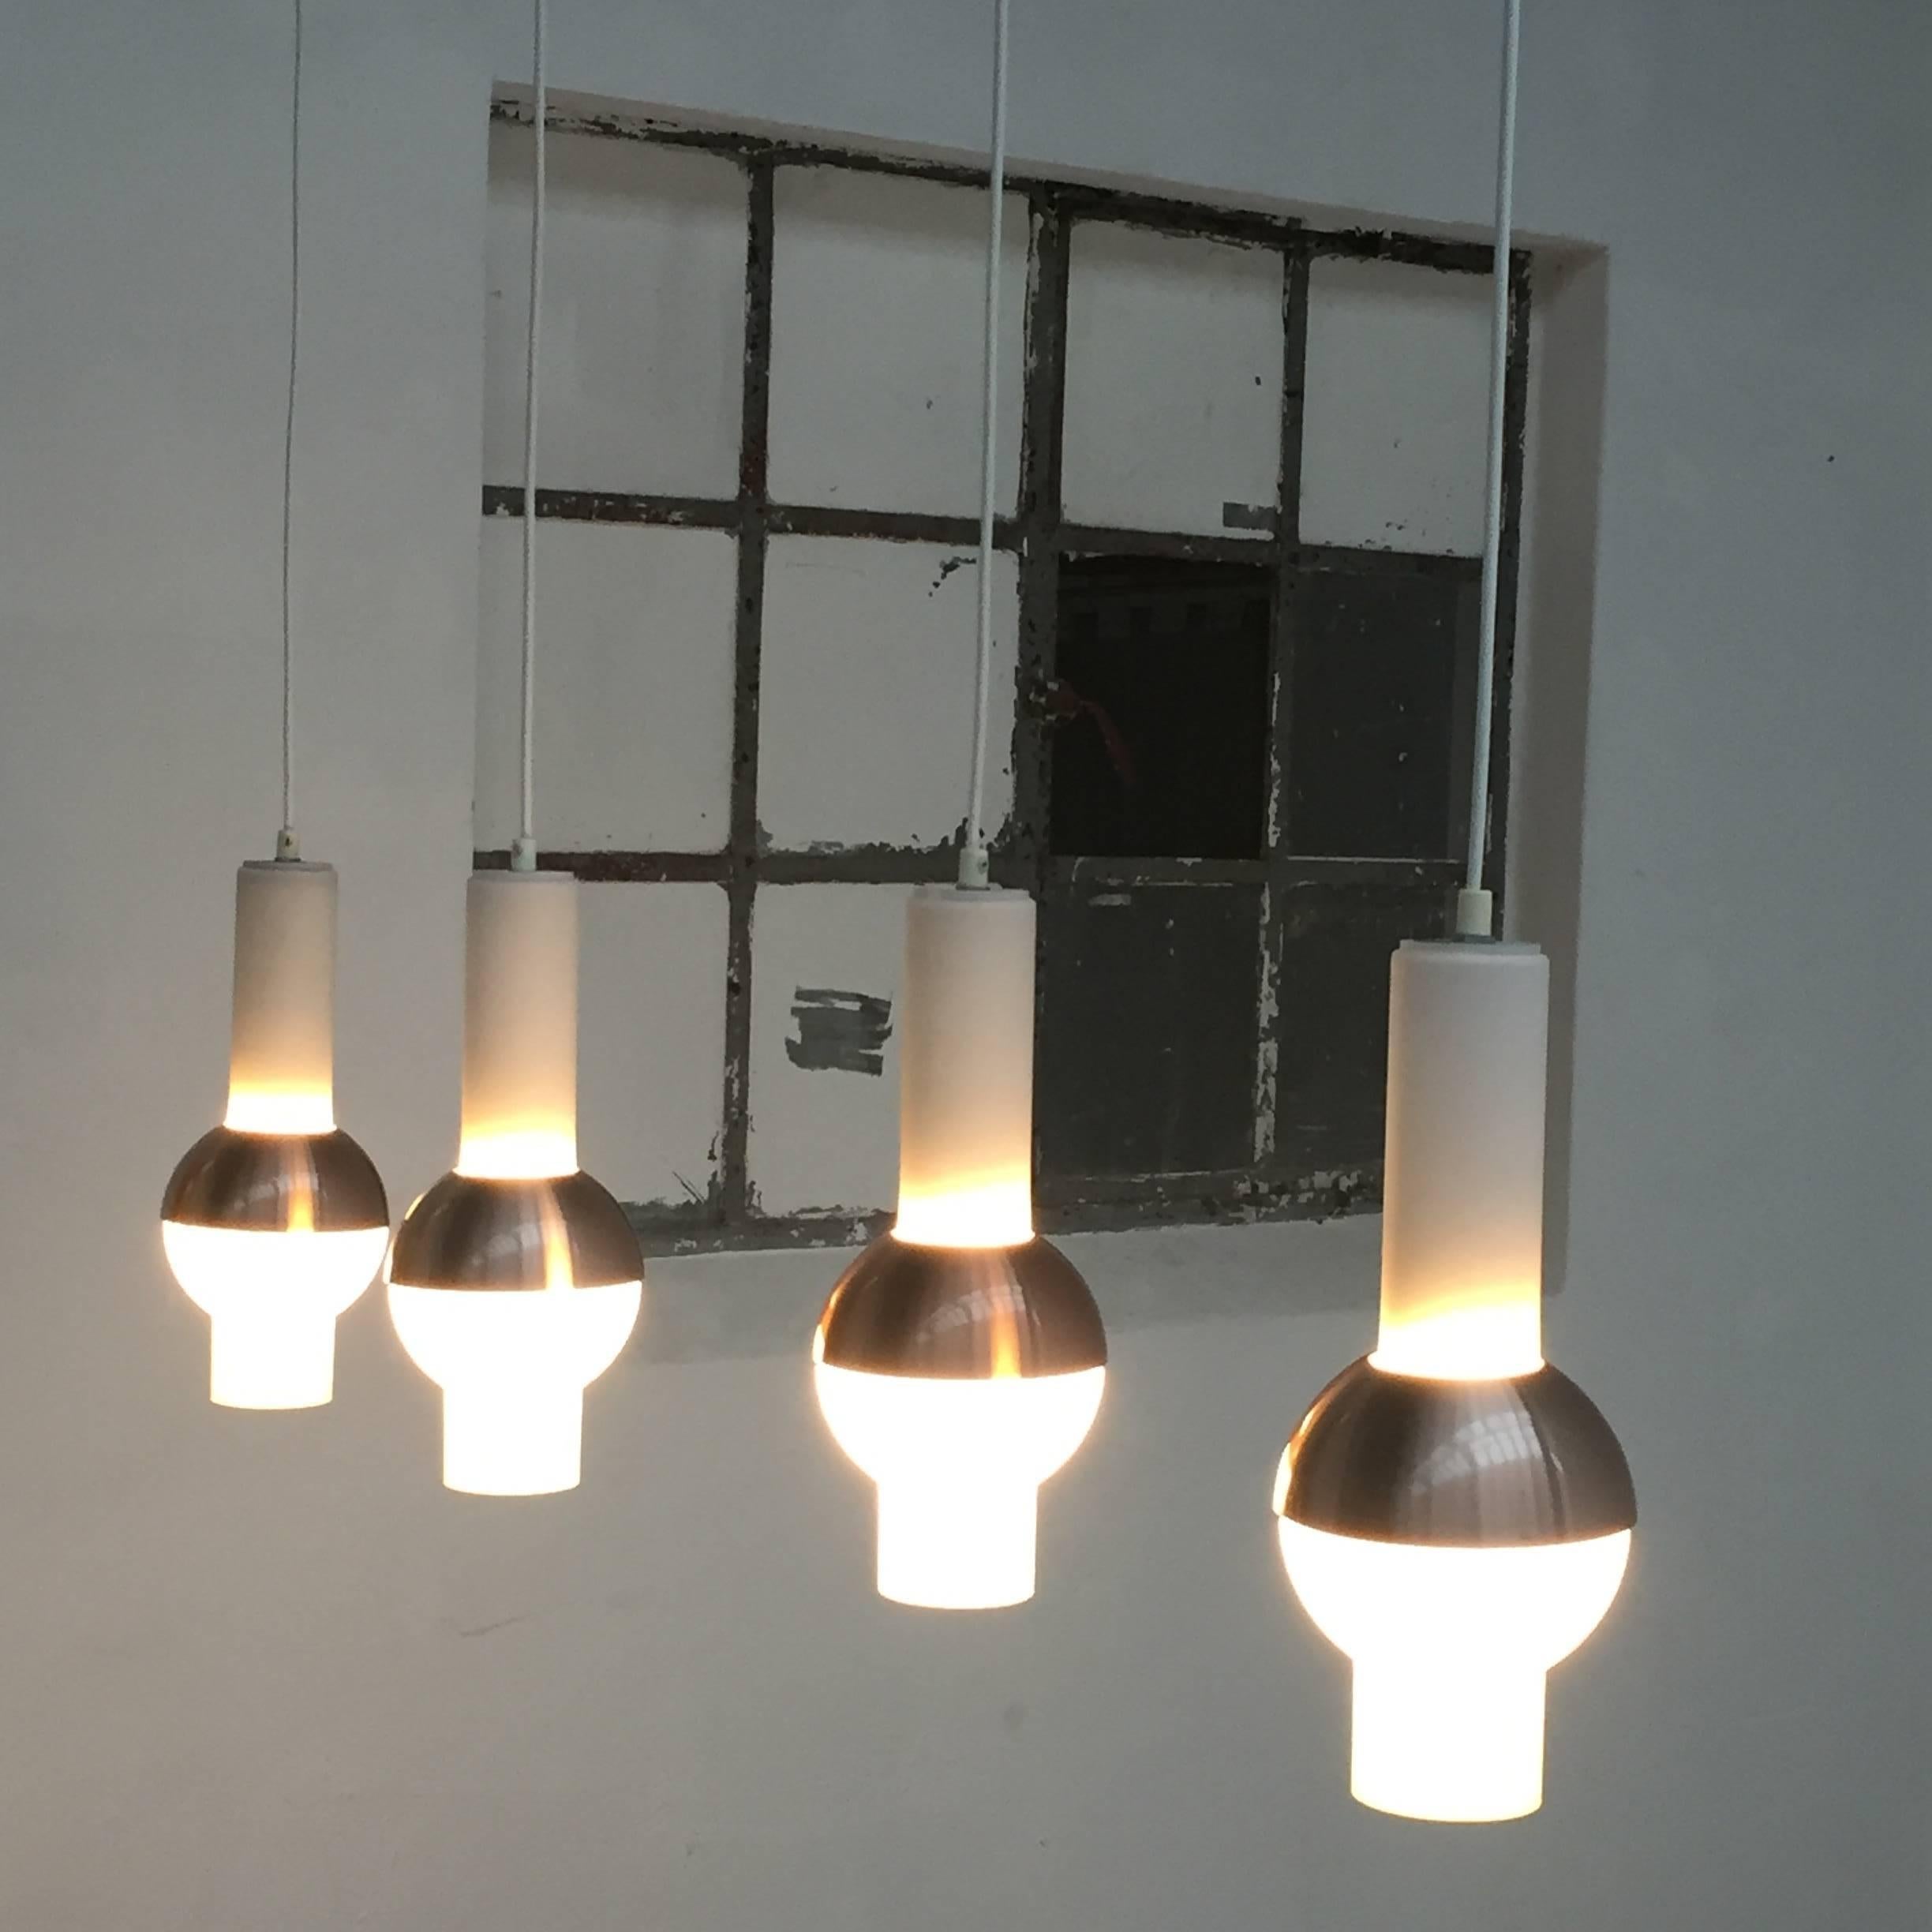 Set of 4 glass and brass anodised aluminium pendants by Raak Lighting Architecture Amsterdam first listed in their catalogue in 1966 and only in production for 3 years

The pendants are clearly influenced by the Space Race from the late 1960's and